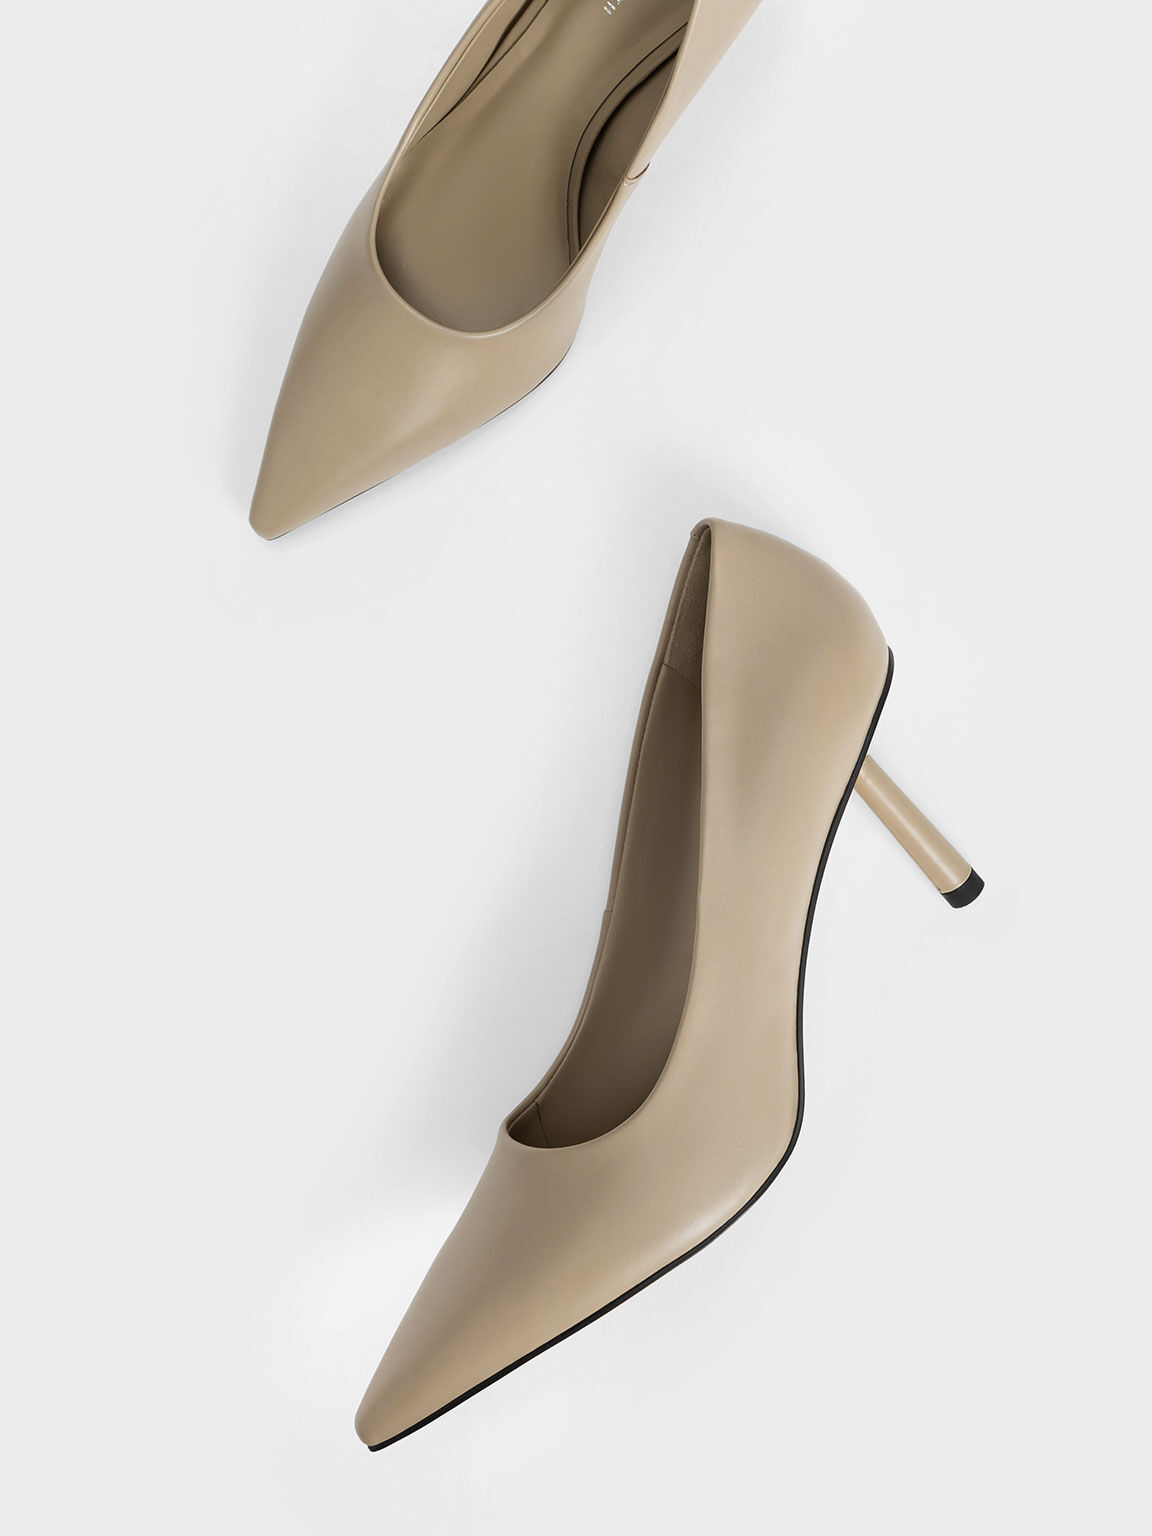 Pointed-Toe Cylindrical Heel Pumps, Sand, hi-res